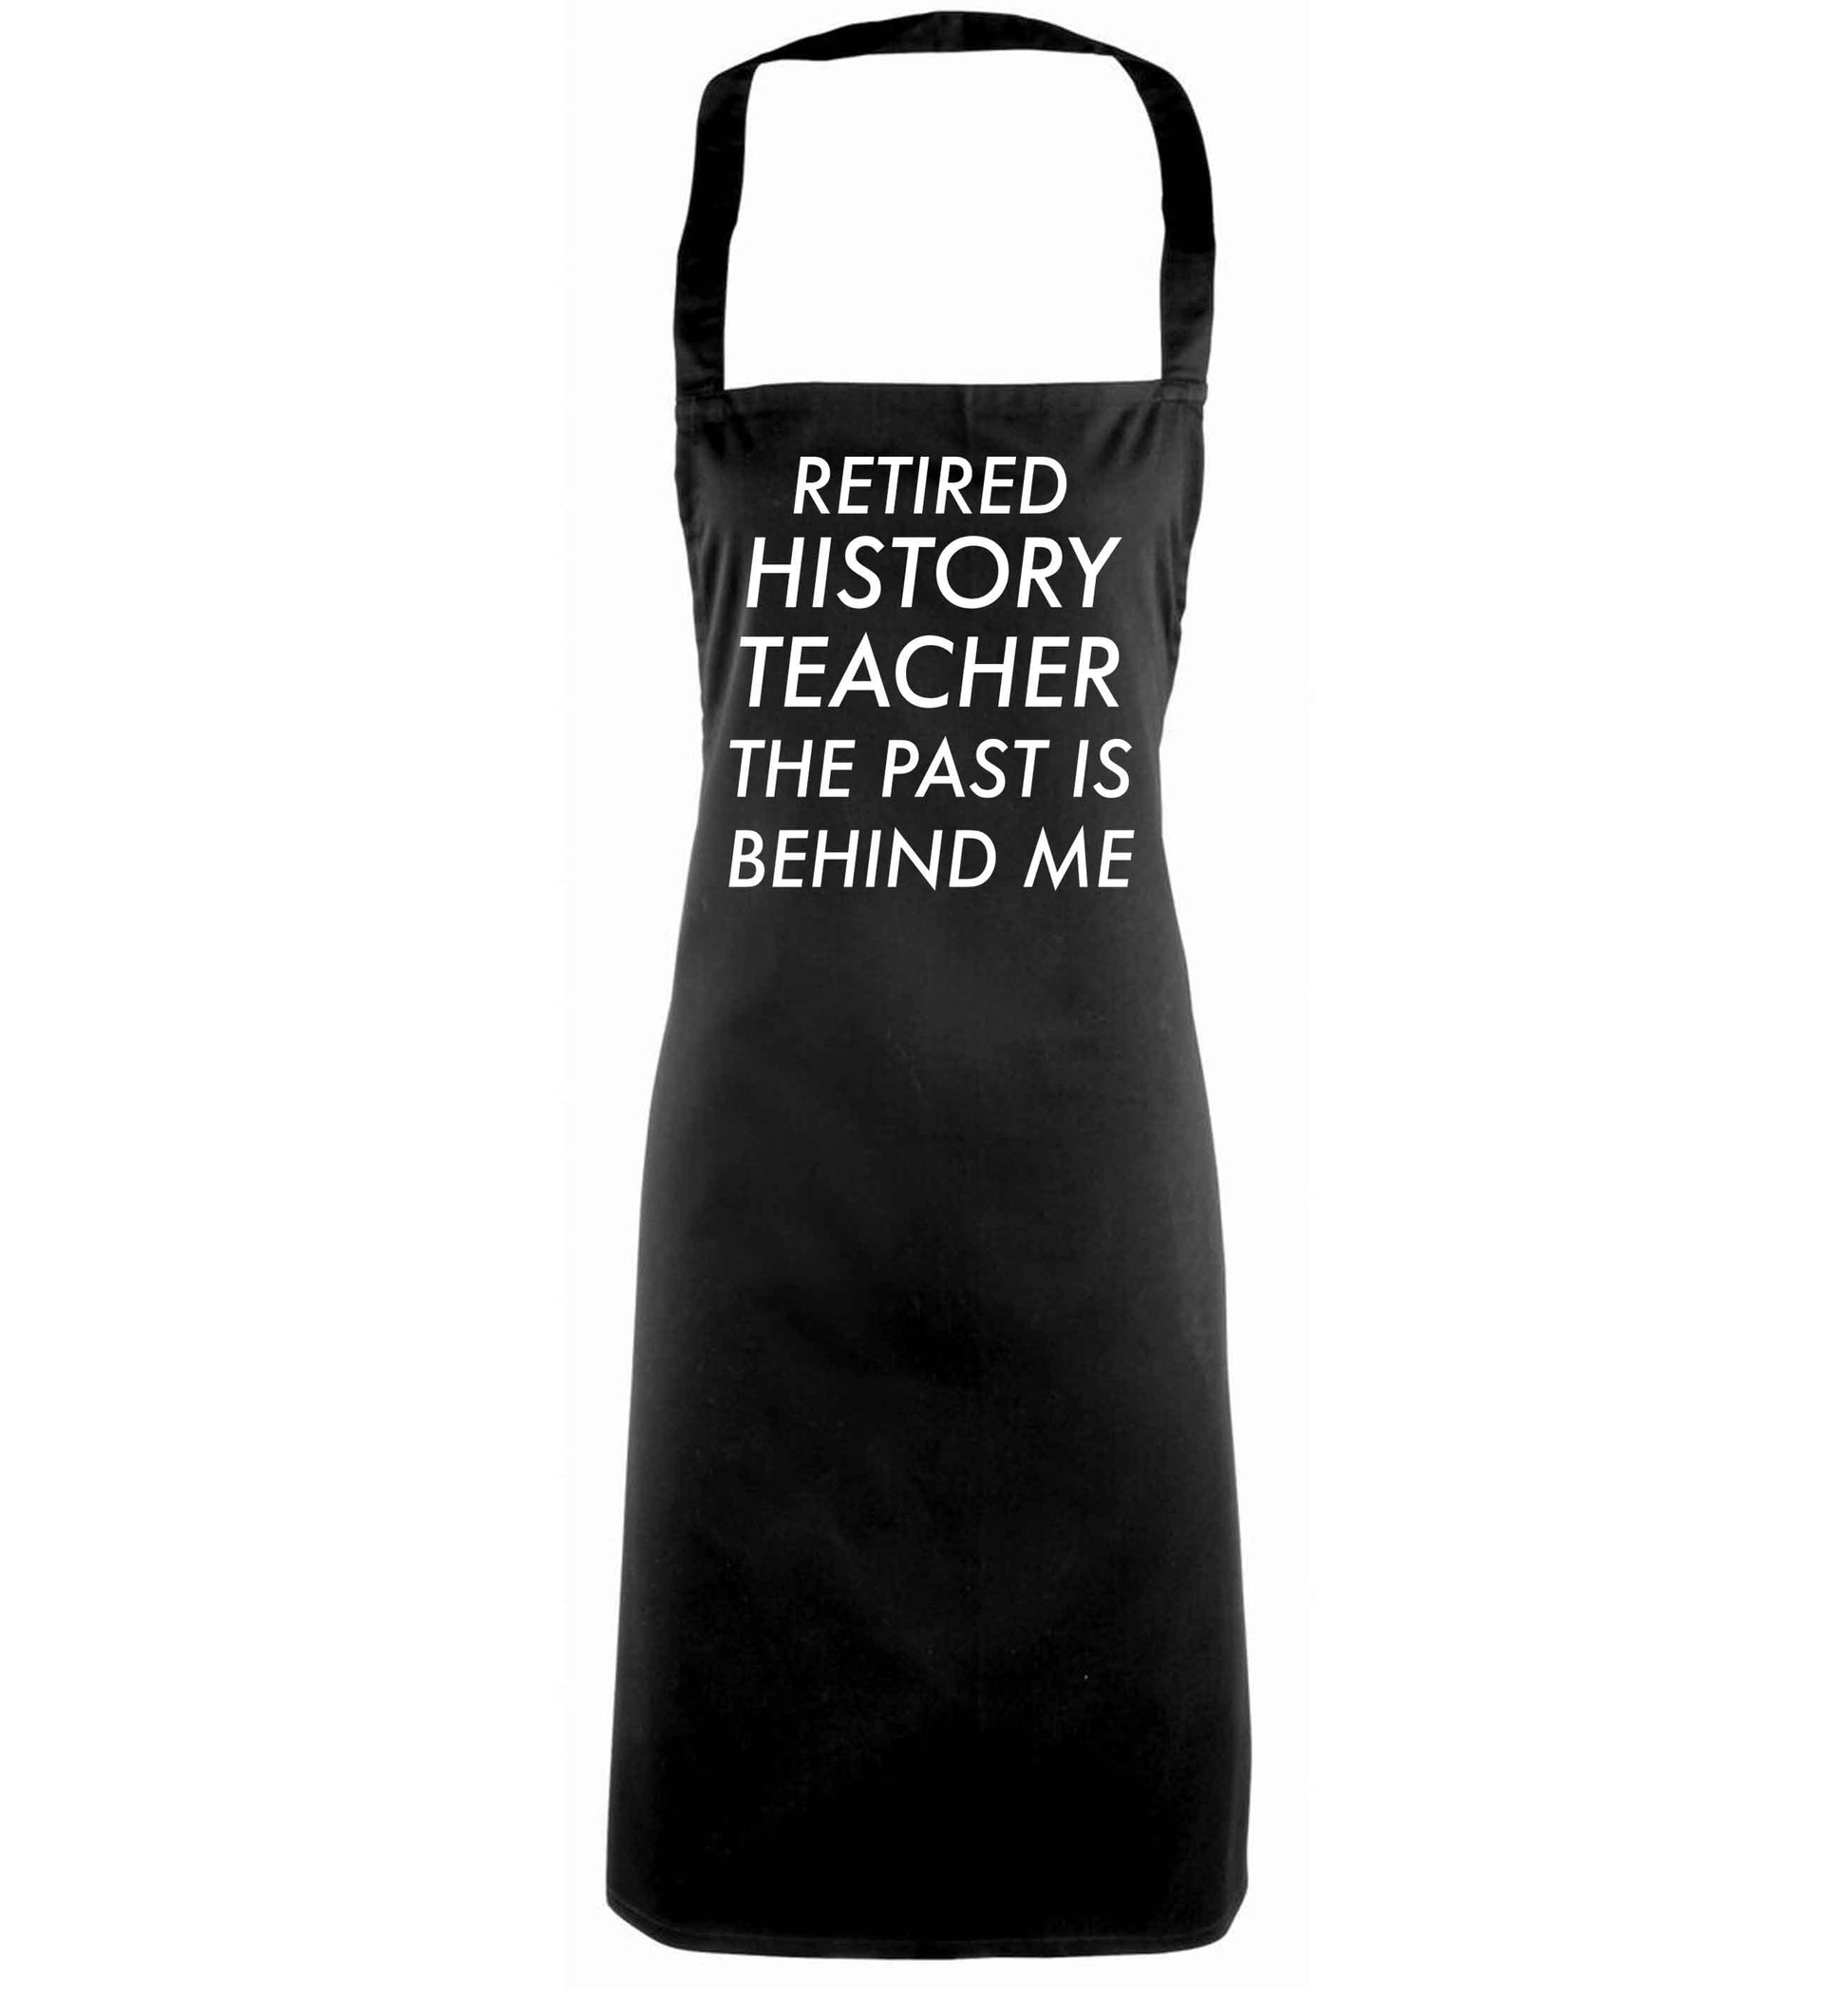 Retired history teacher the past is behind me black apron